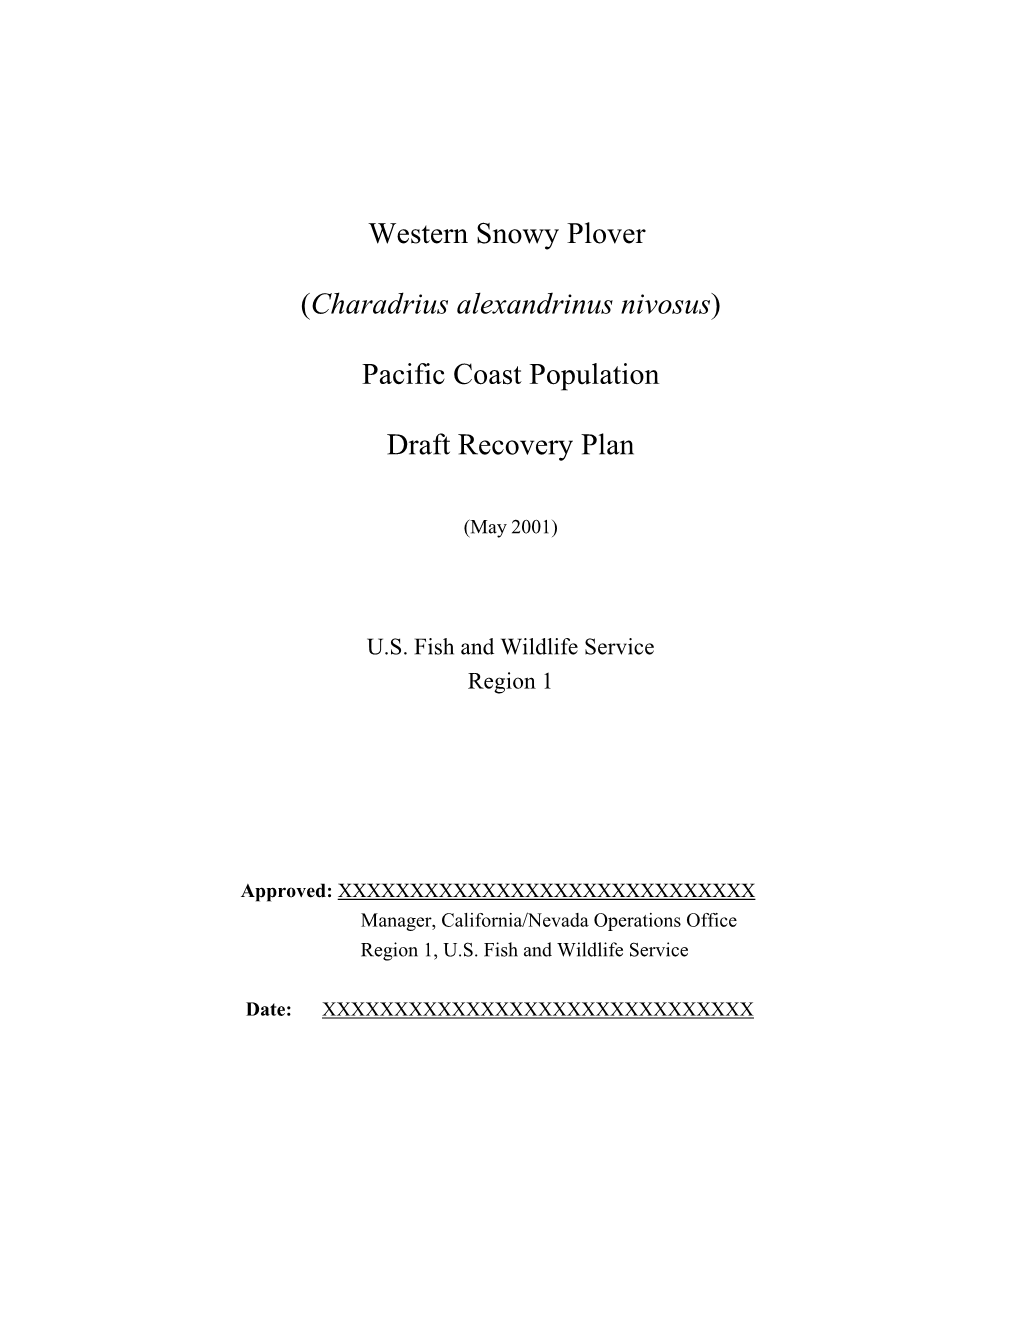 Draft Recovery Plan for the Western Snowy Plover, Pacific Coast